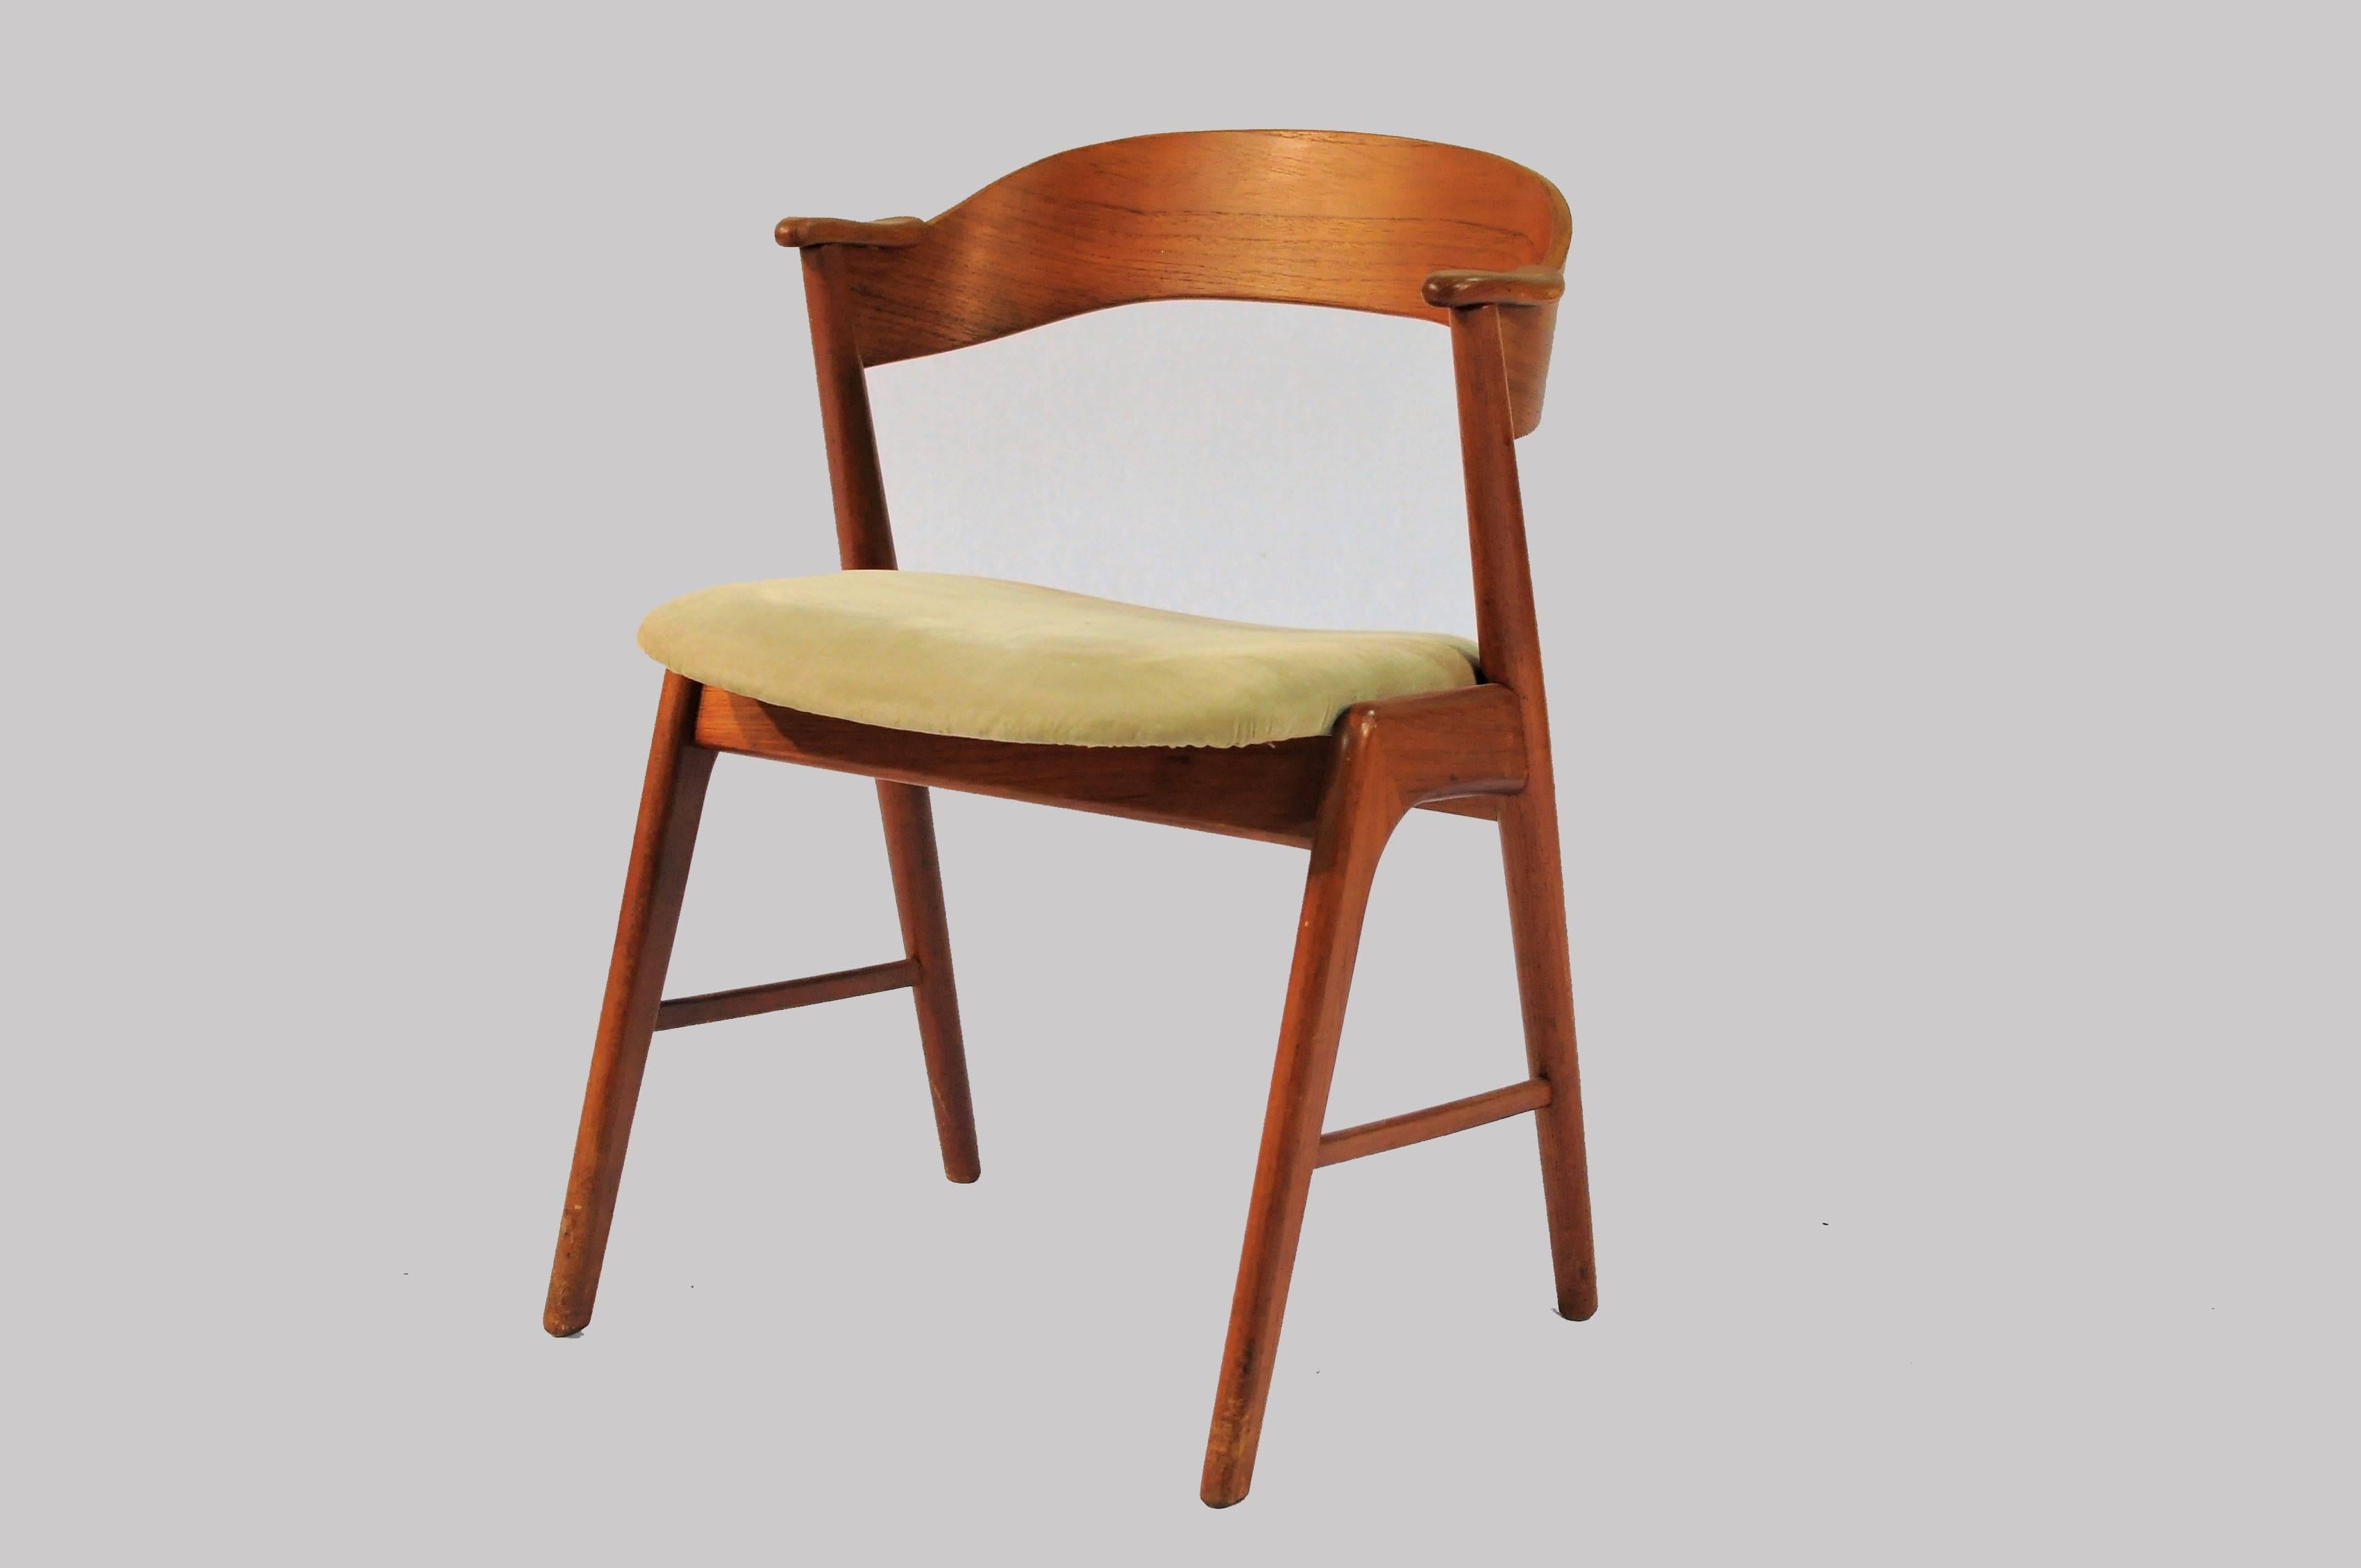 Set of two Danish dining chairs in teak with curved backrests and elegant frames. The chairs are commonly known as model 32 and by many attributed to Kai Kristiansen.

The chairs are well crafted and feature refinished frames in good condition with